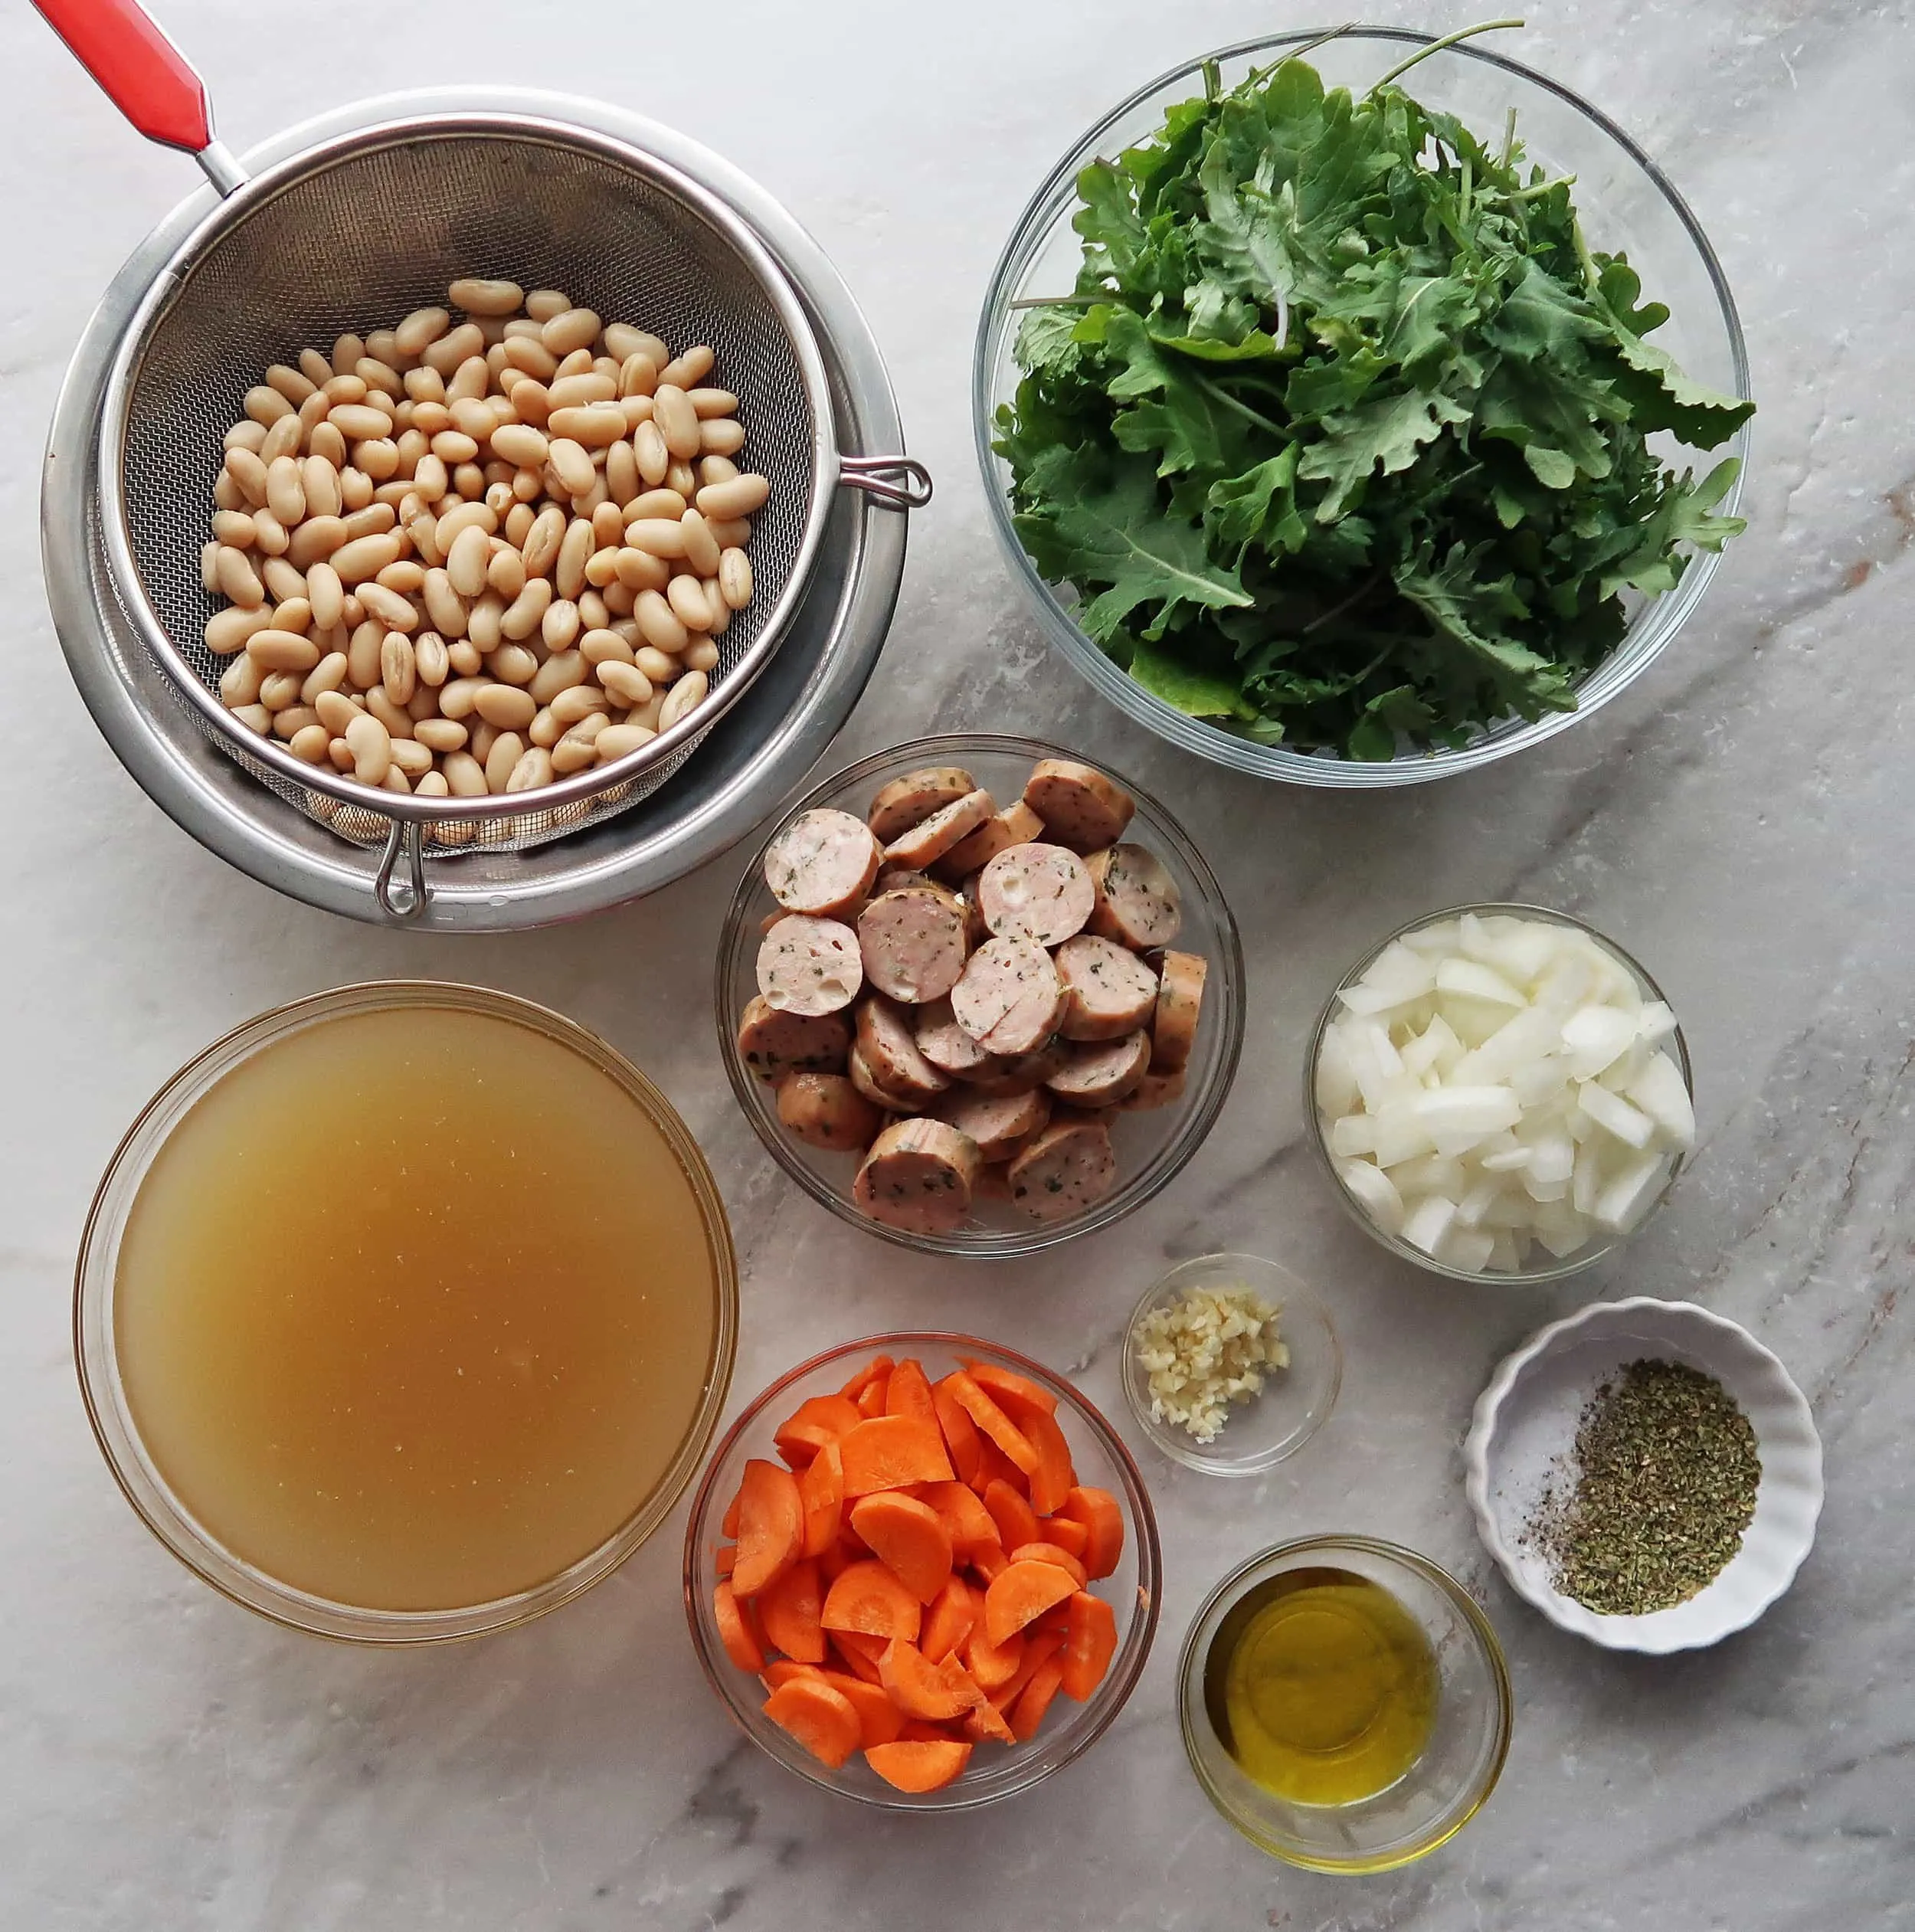 Carrots, onions, sausages slices, white beans, kale, and broth.